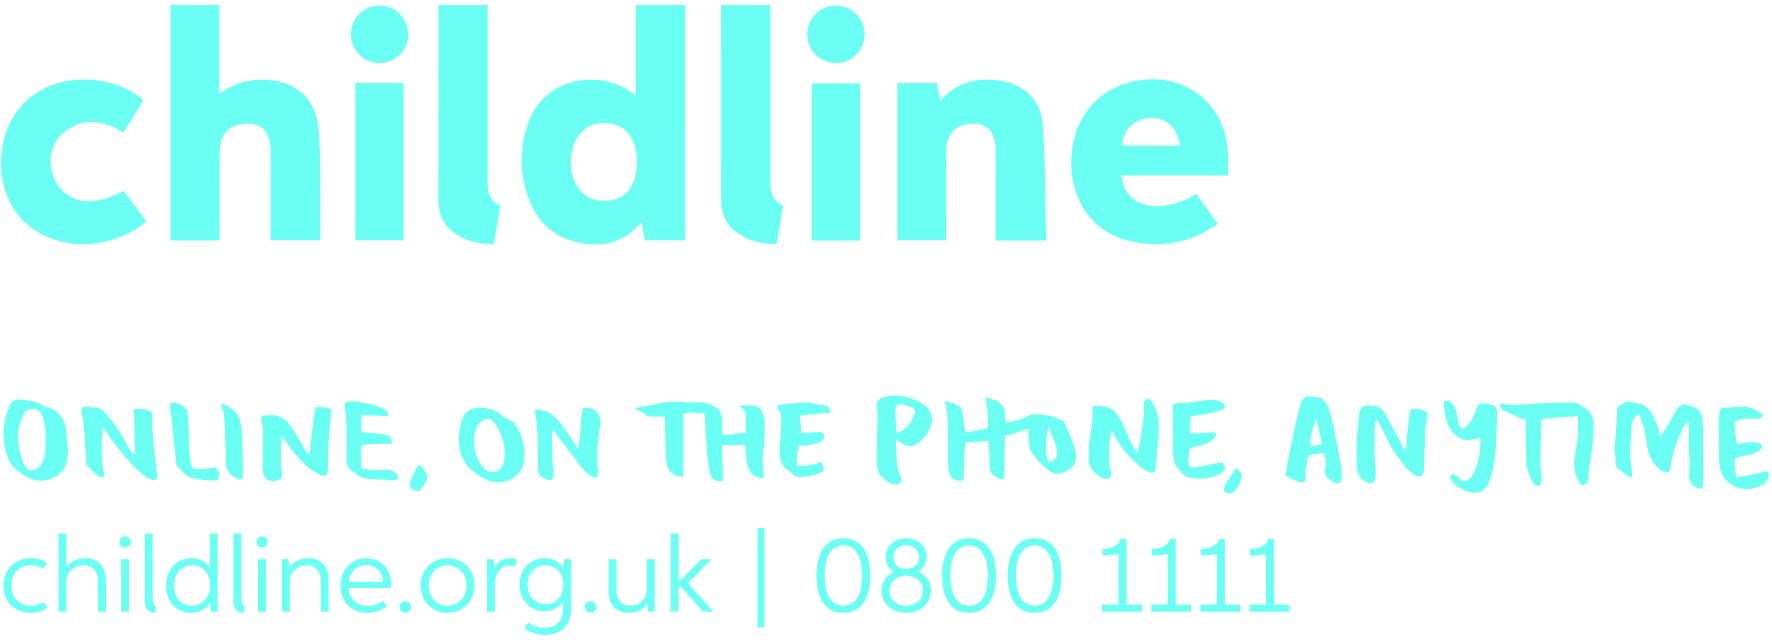 Childline offers advice to parents on a variety of subjects